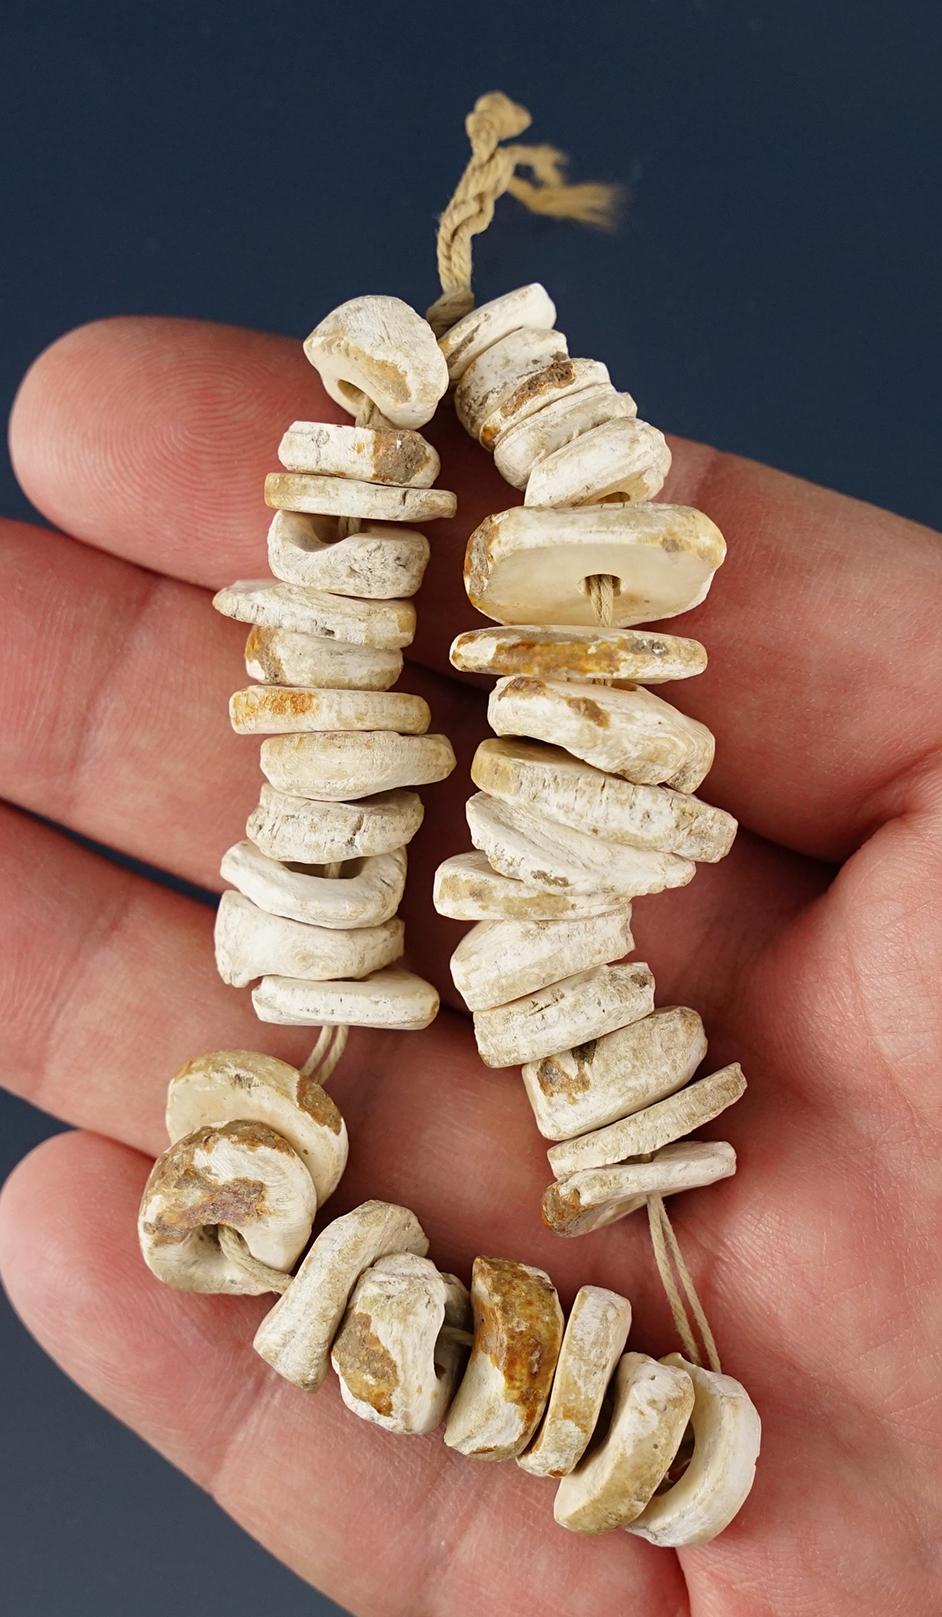 6" long strand of drilled shell beads found in Hardy, Arkansas by Henry Hudson Norman Jr.